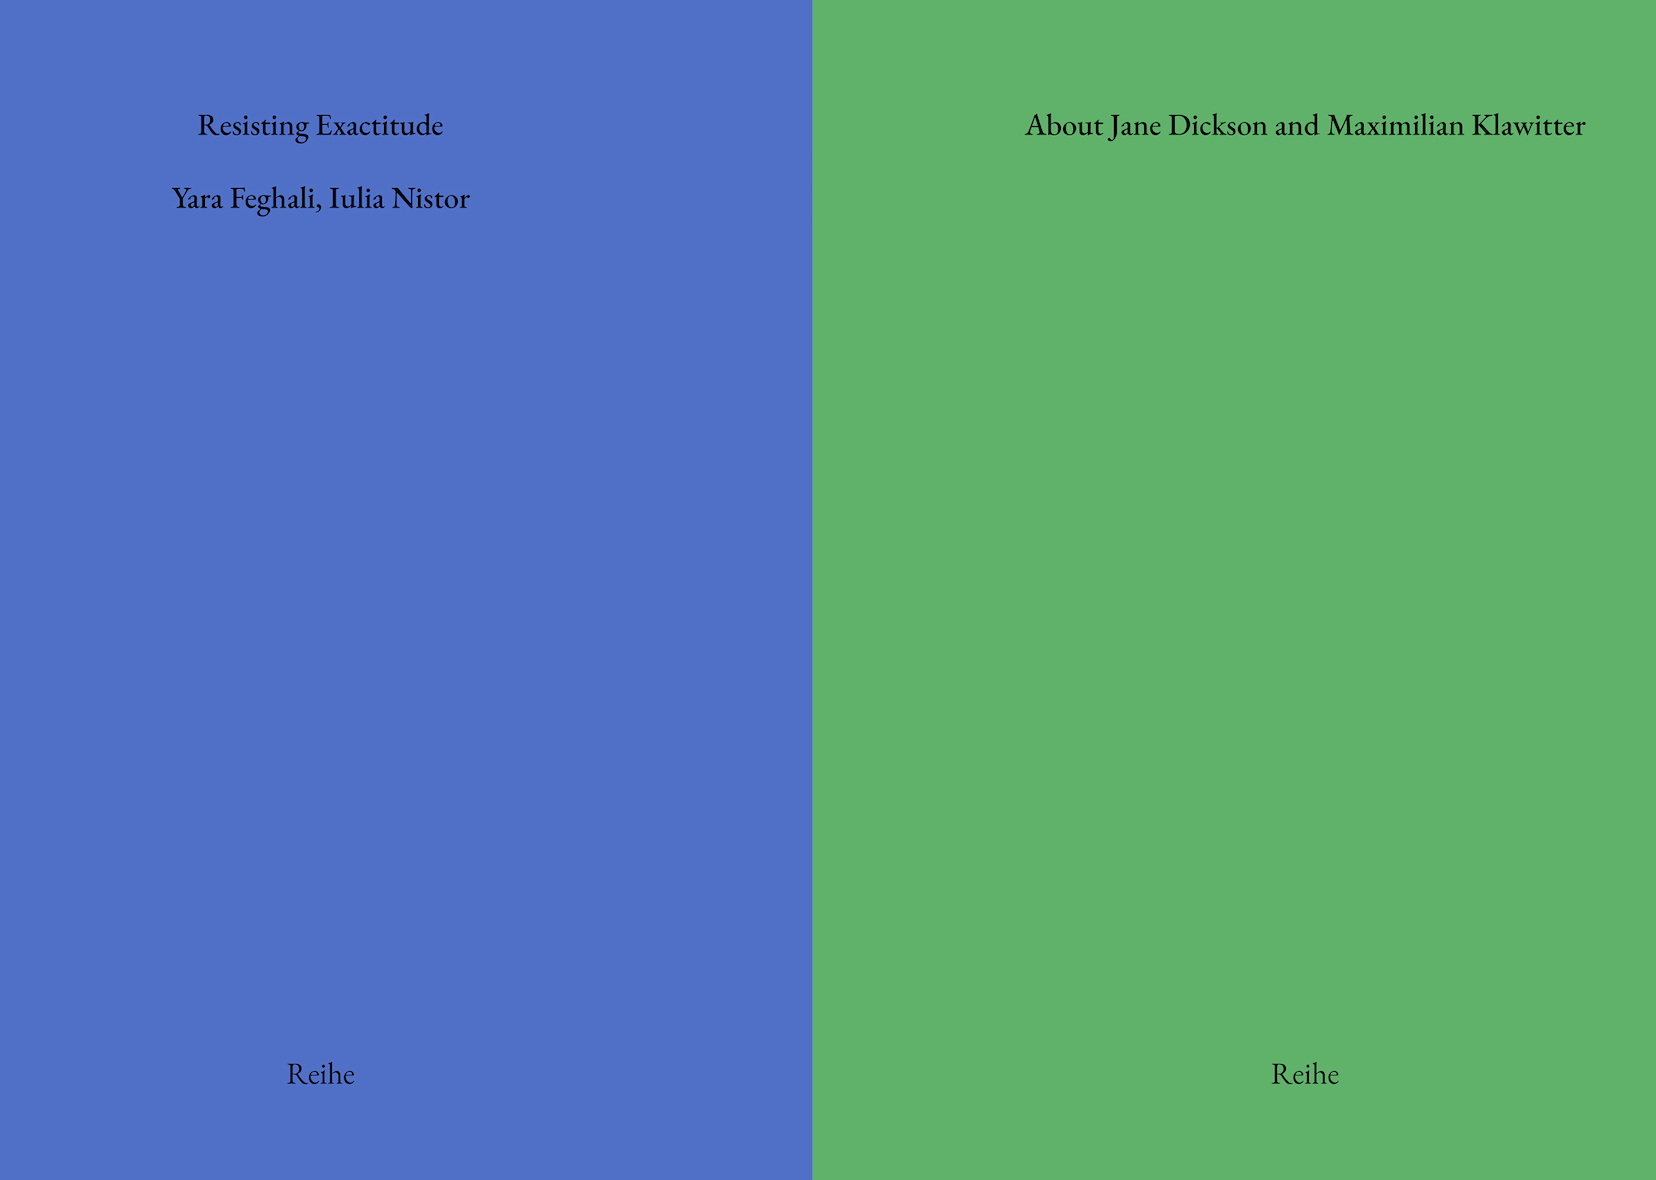  - booklaunch : Resisting Exactitude + About Jane Dickson and Maximilian Klawitter